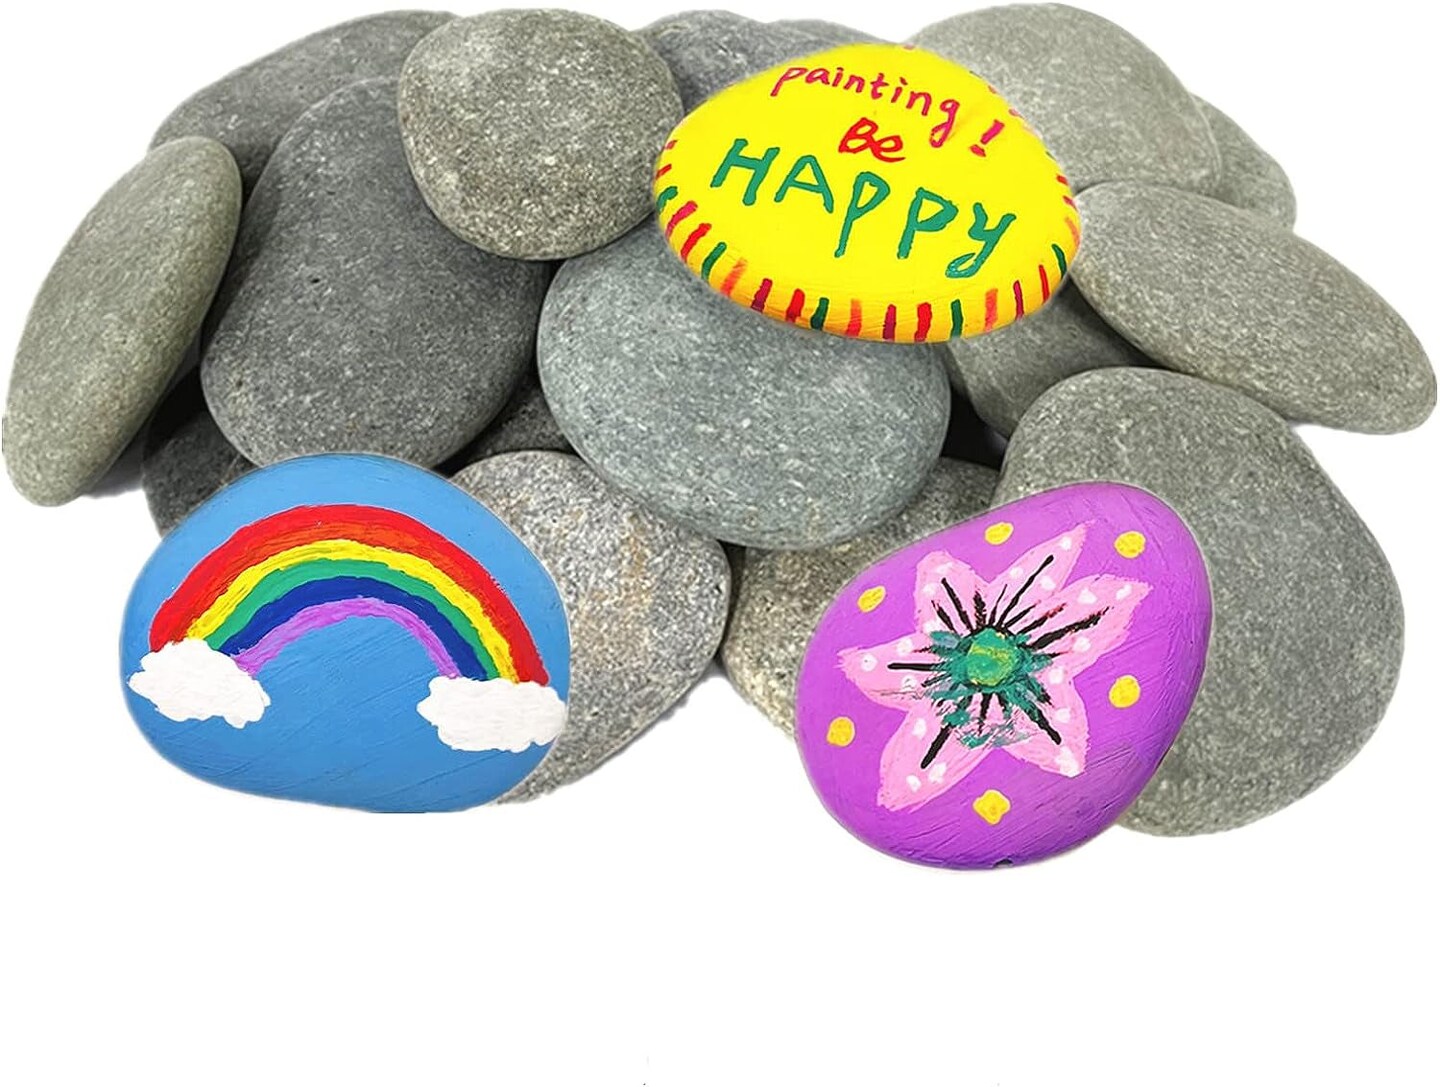  lifetop 50PCS Painting Rocks, Natural DIY Rocks Flat & Smooth  Kindness Rocks for Arts, Crafts, Decoration, Medium & Small Rocks for  Painting ，1.5-3Hand Picked for Painting Rocks: Paintings